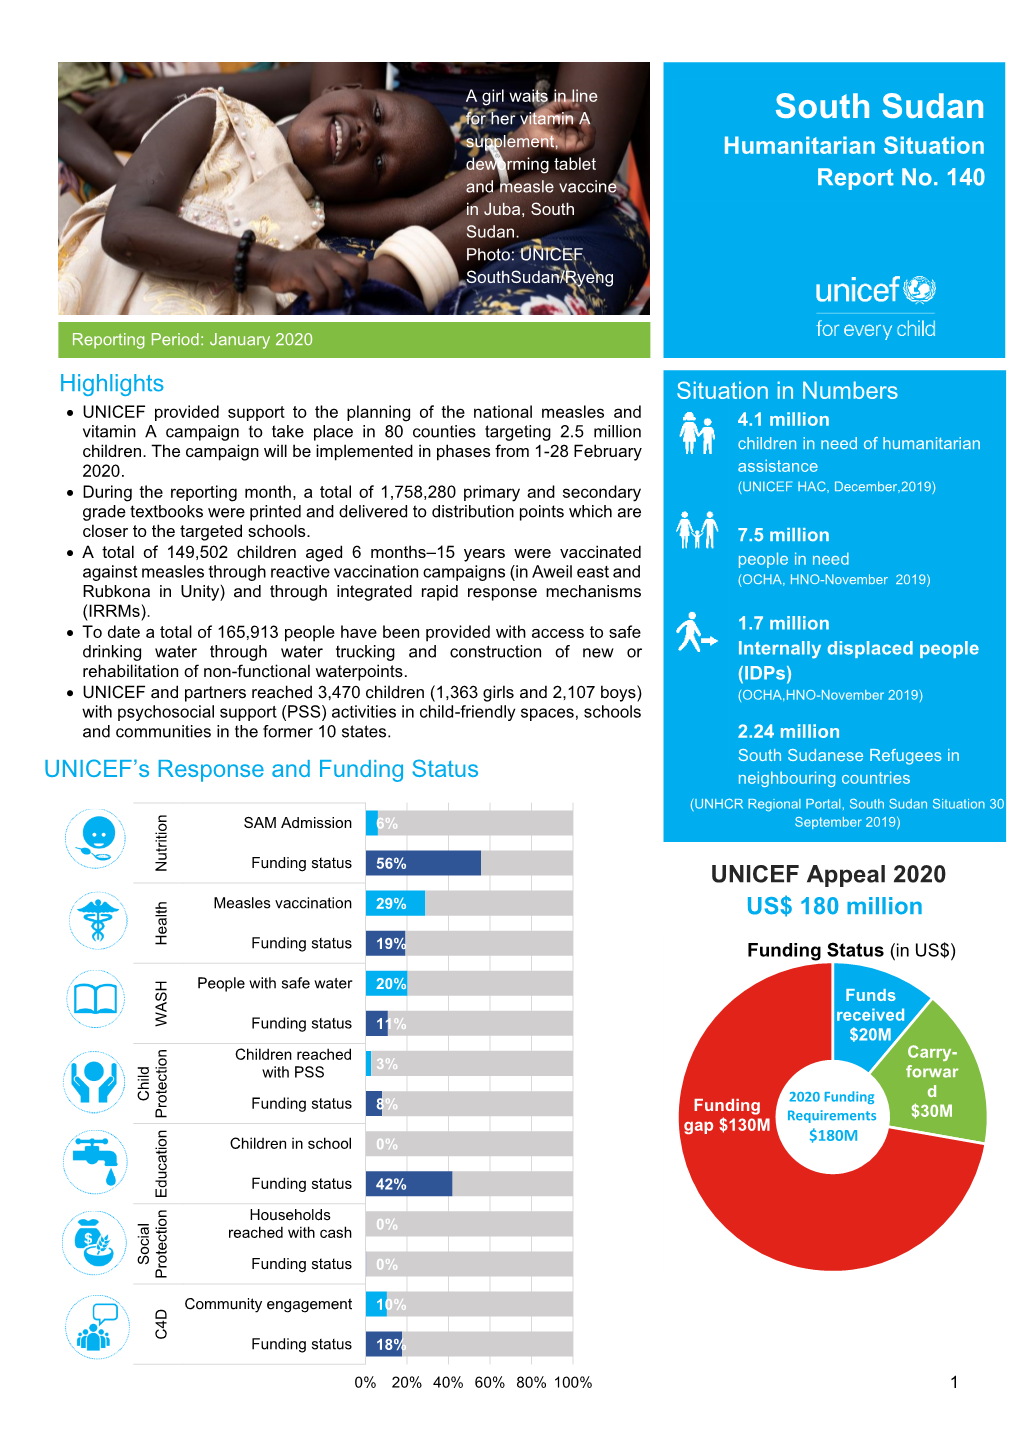 South Sudan Supplement, Humanitarian Situation Deworming Tablet and Measle Vaccine Report No